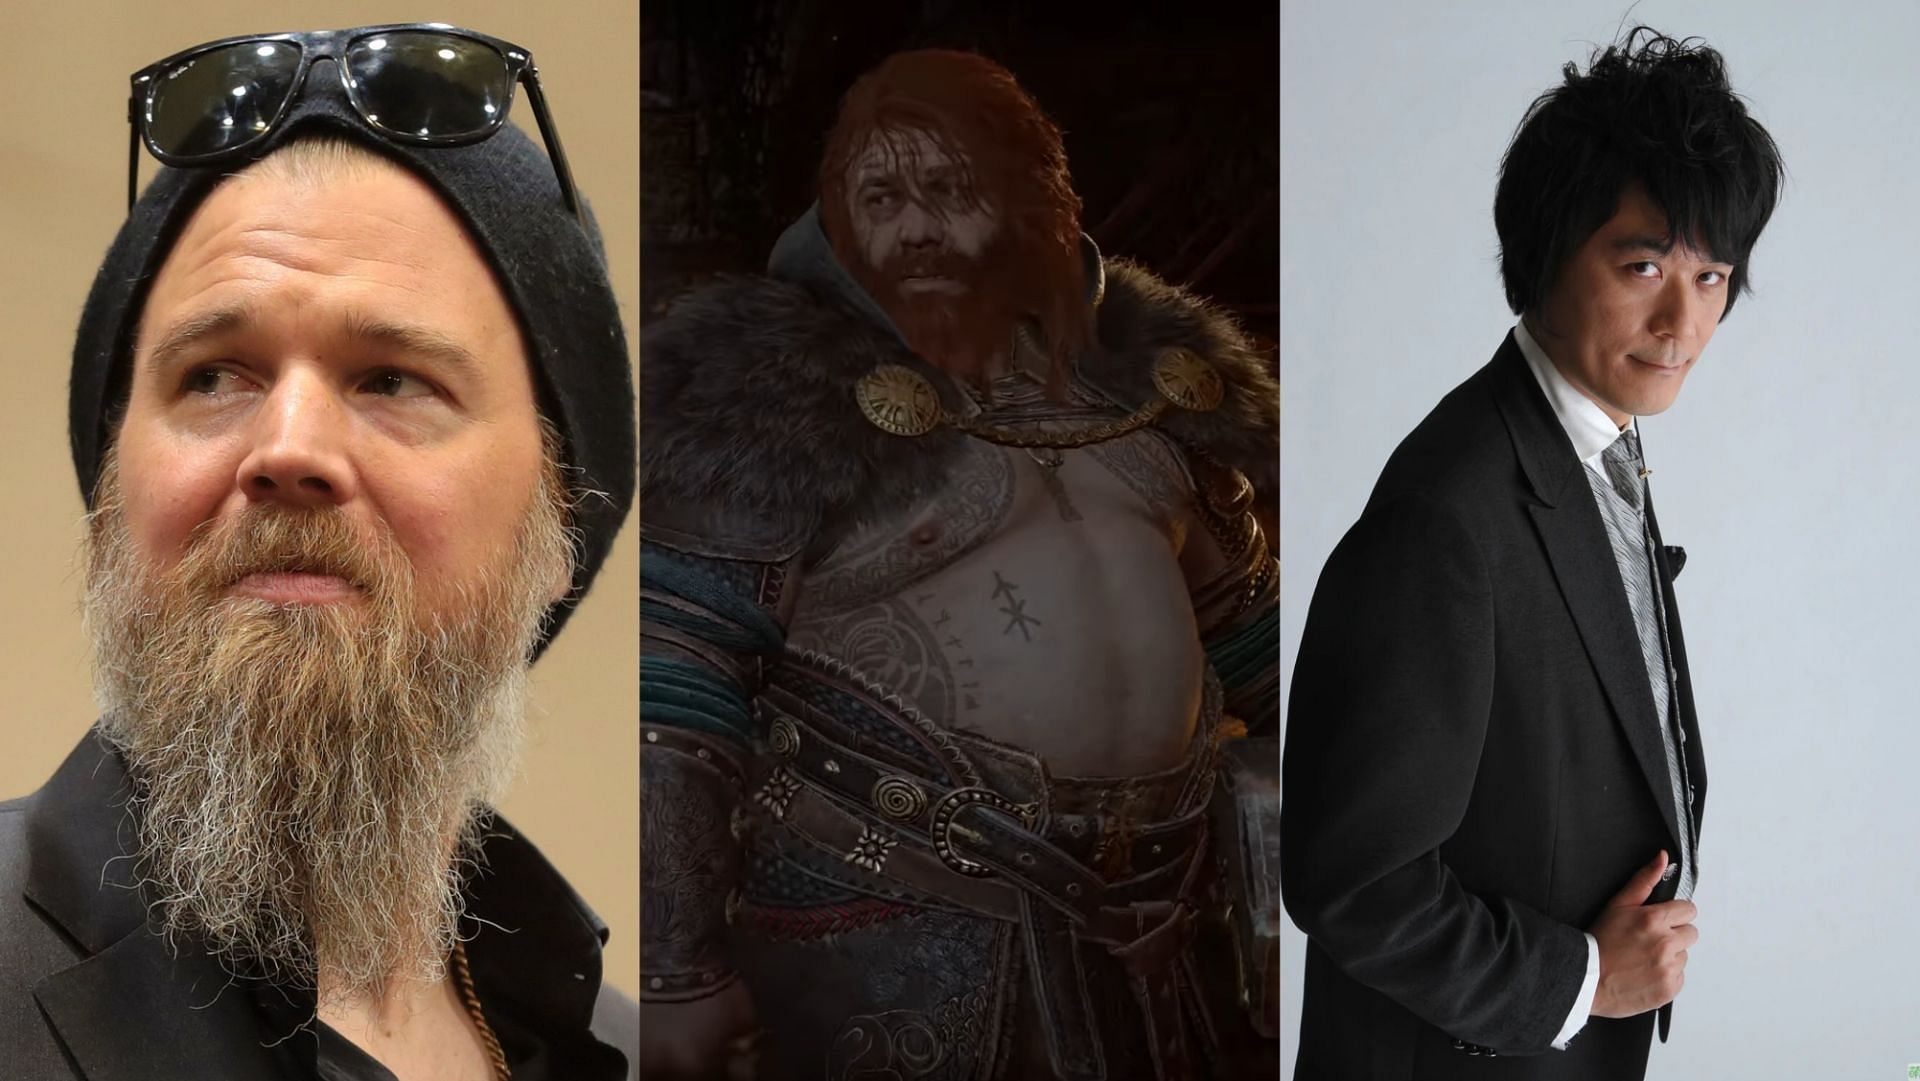 Who is the voice actor of Thor in God of War Ragnarok?